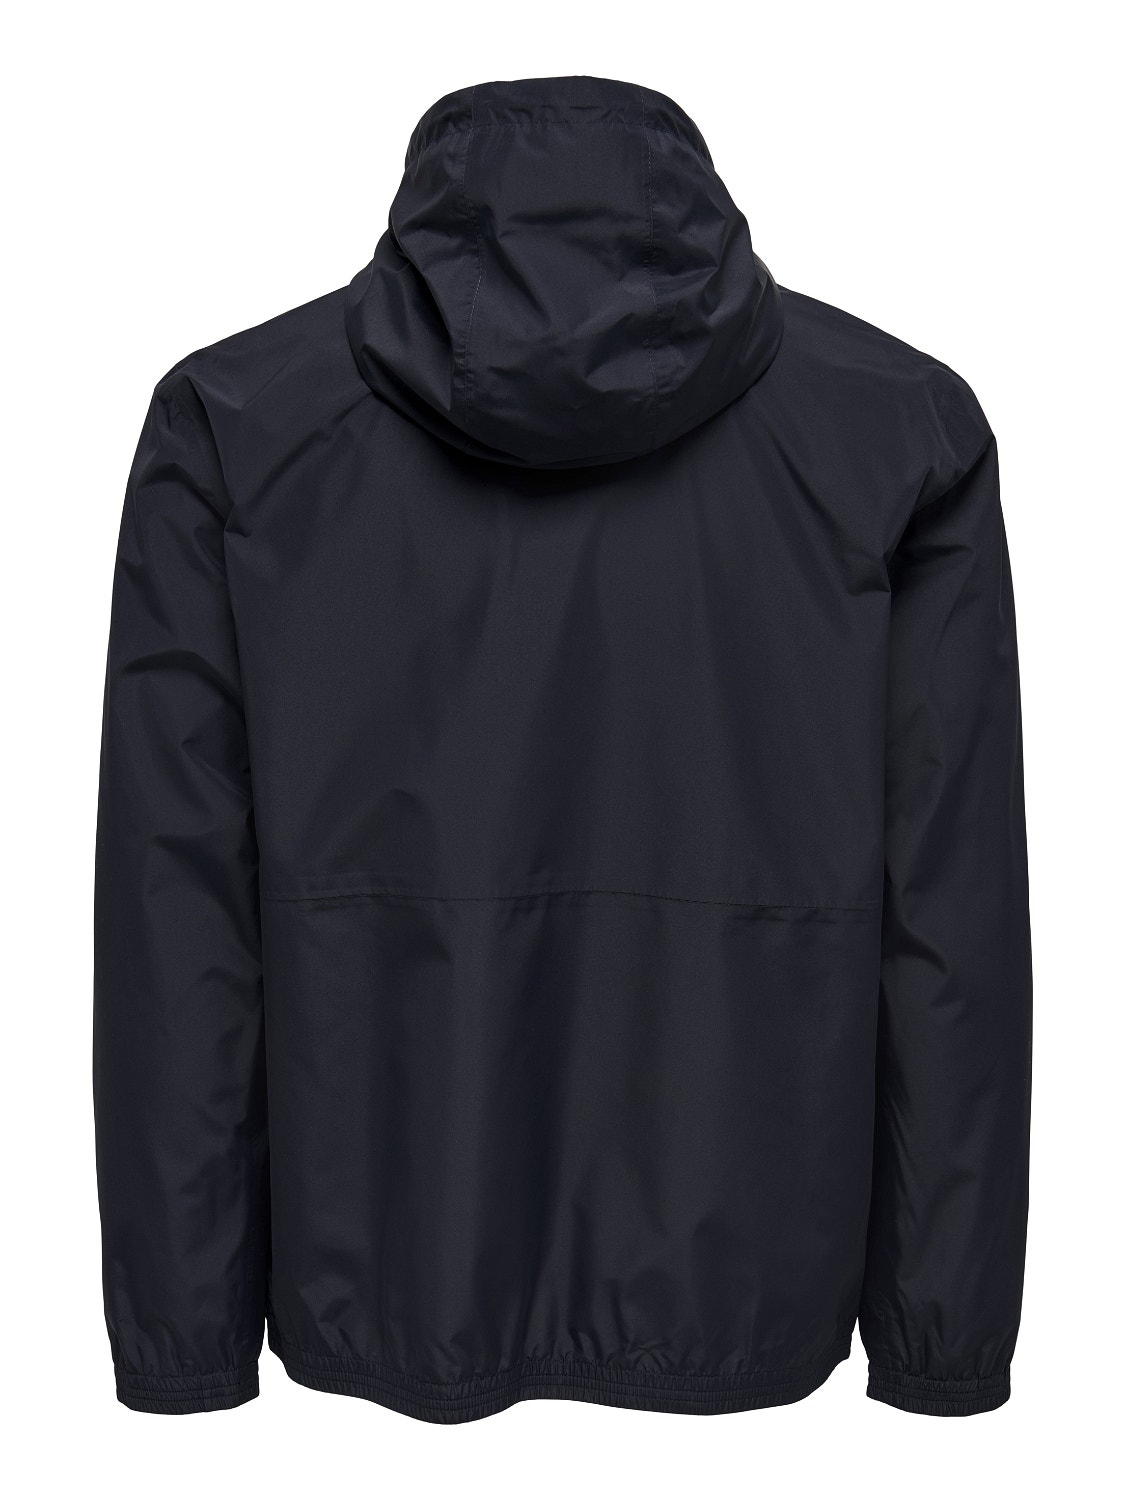 ONLY & SONS Hooded jacket -Dark Navy - 22021518